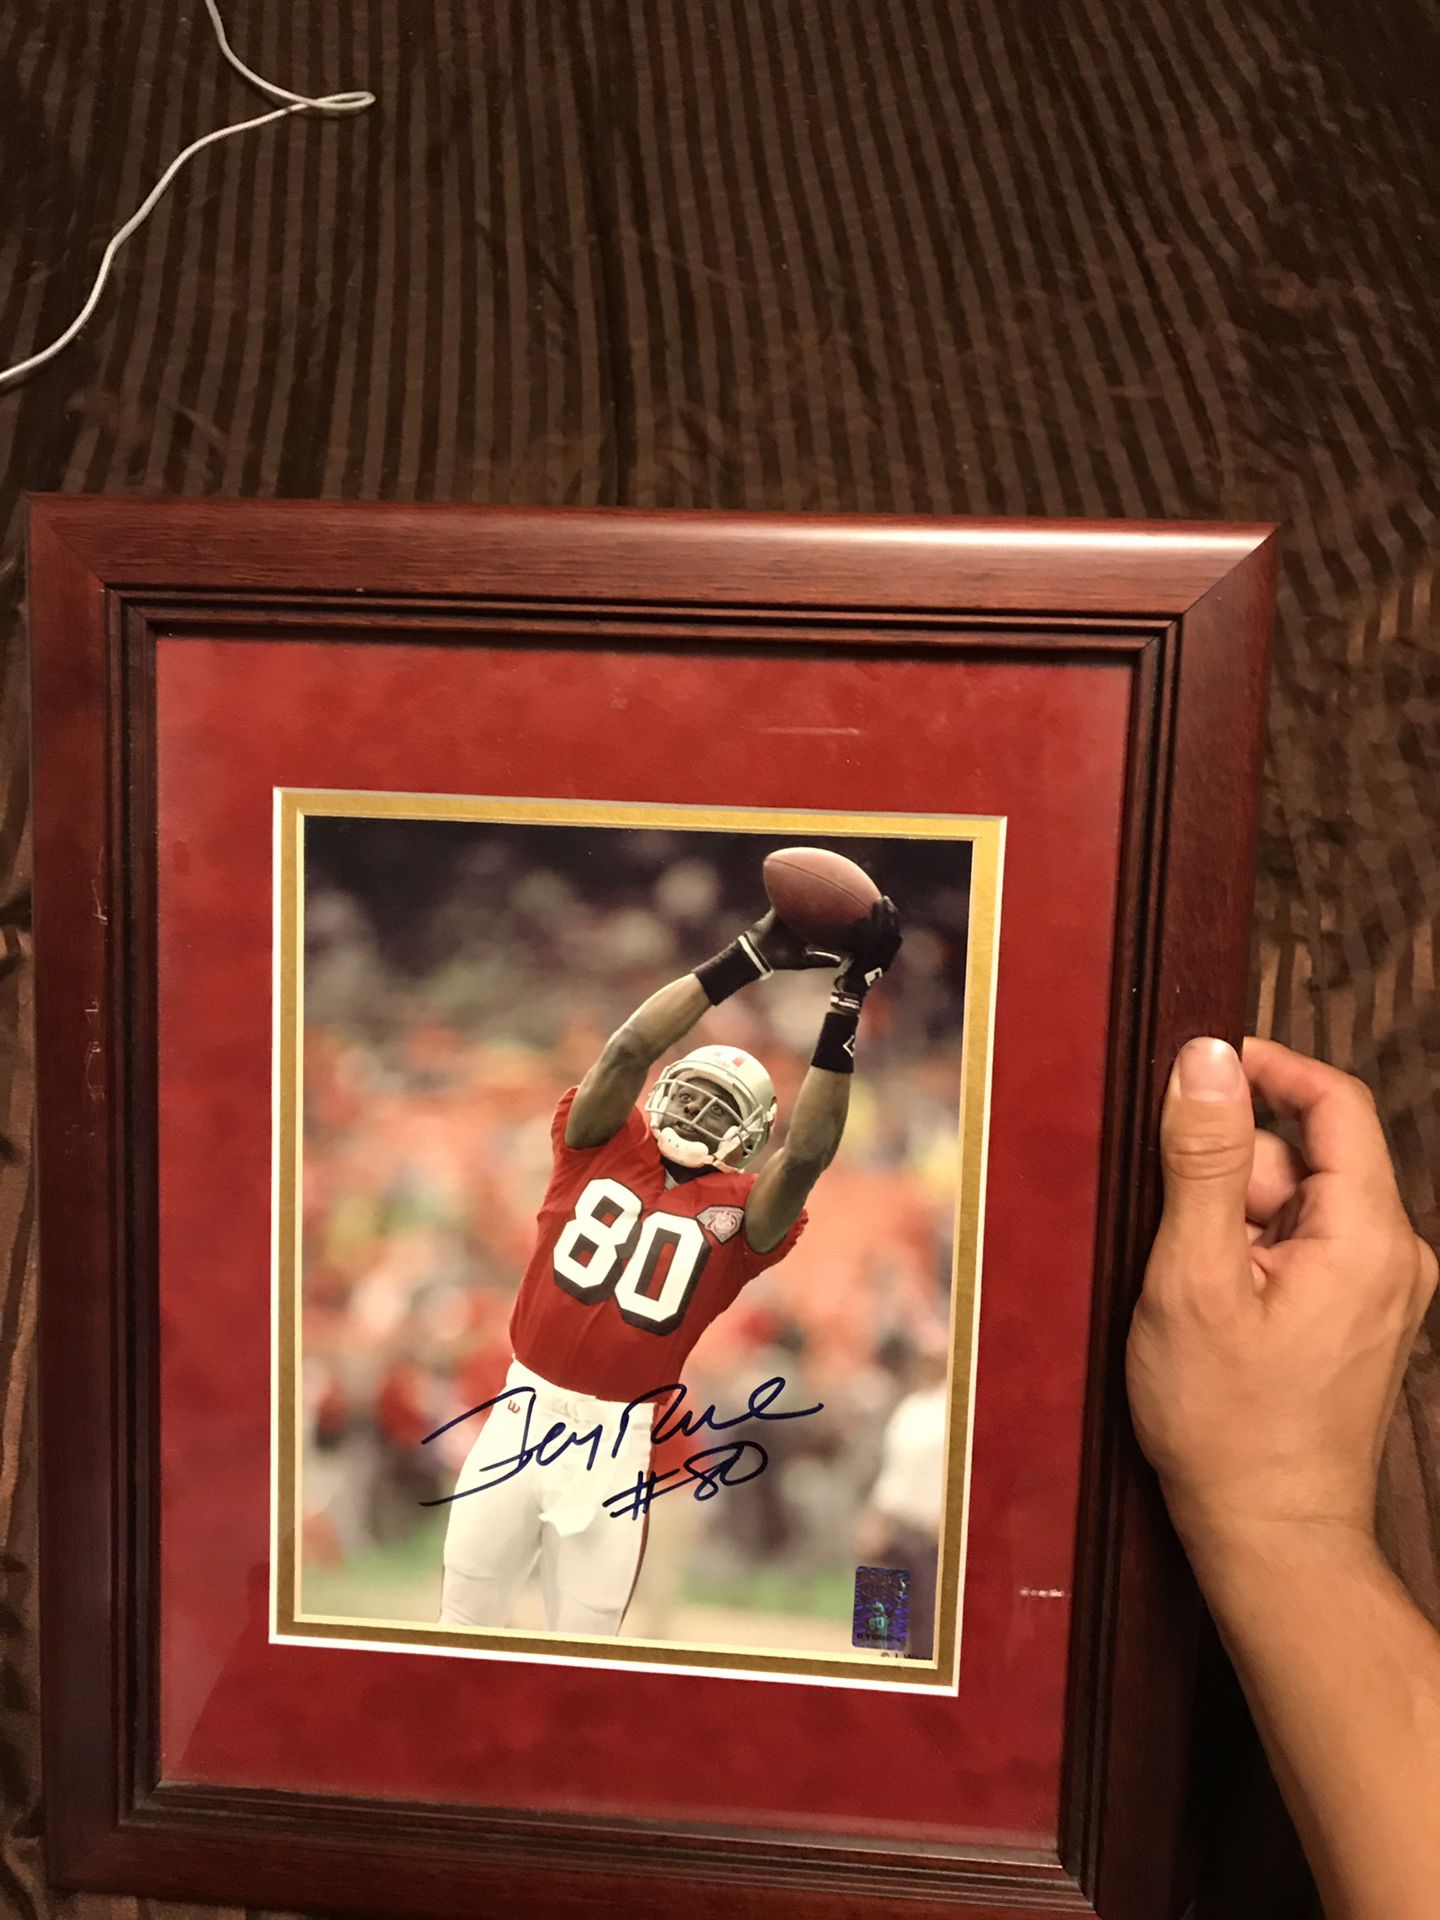 Signed and framed 49ers pics